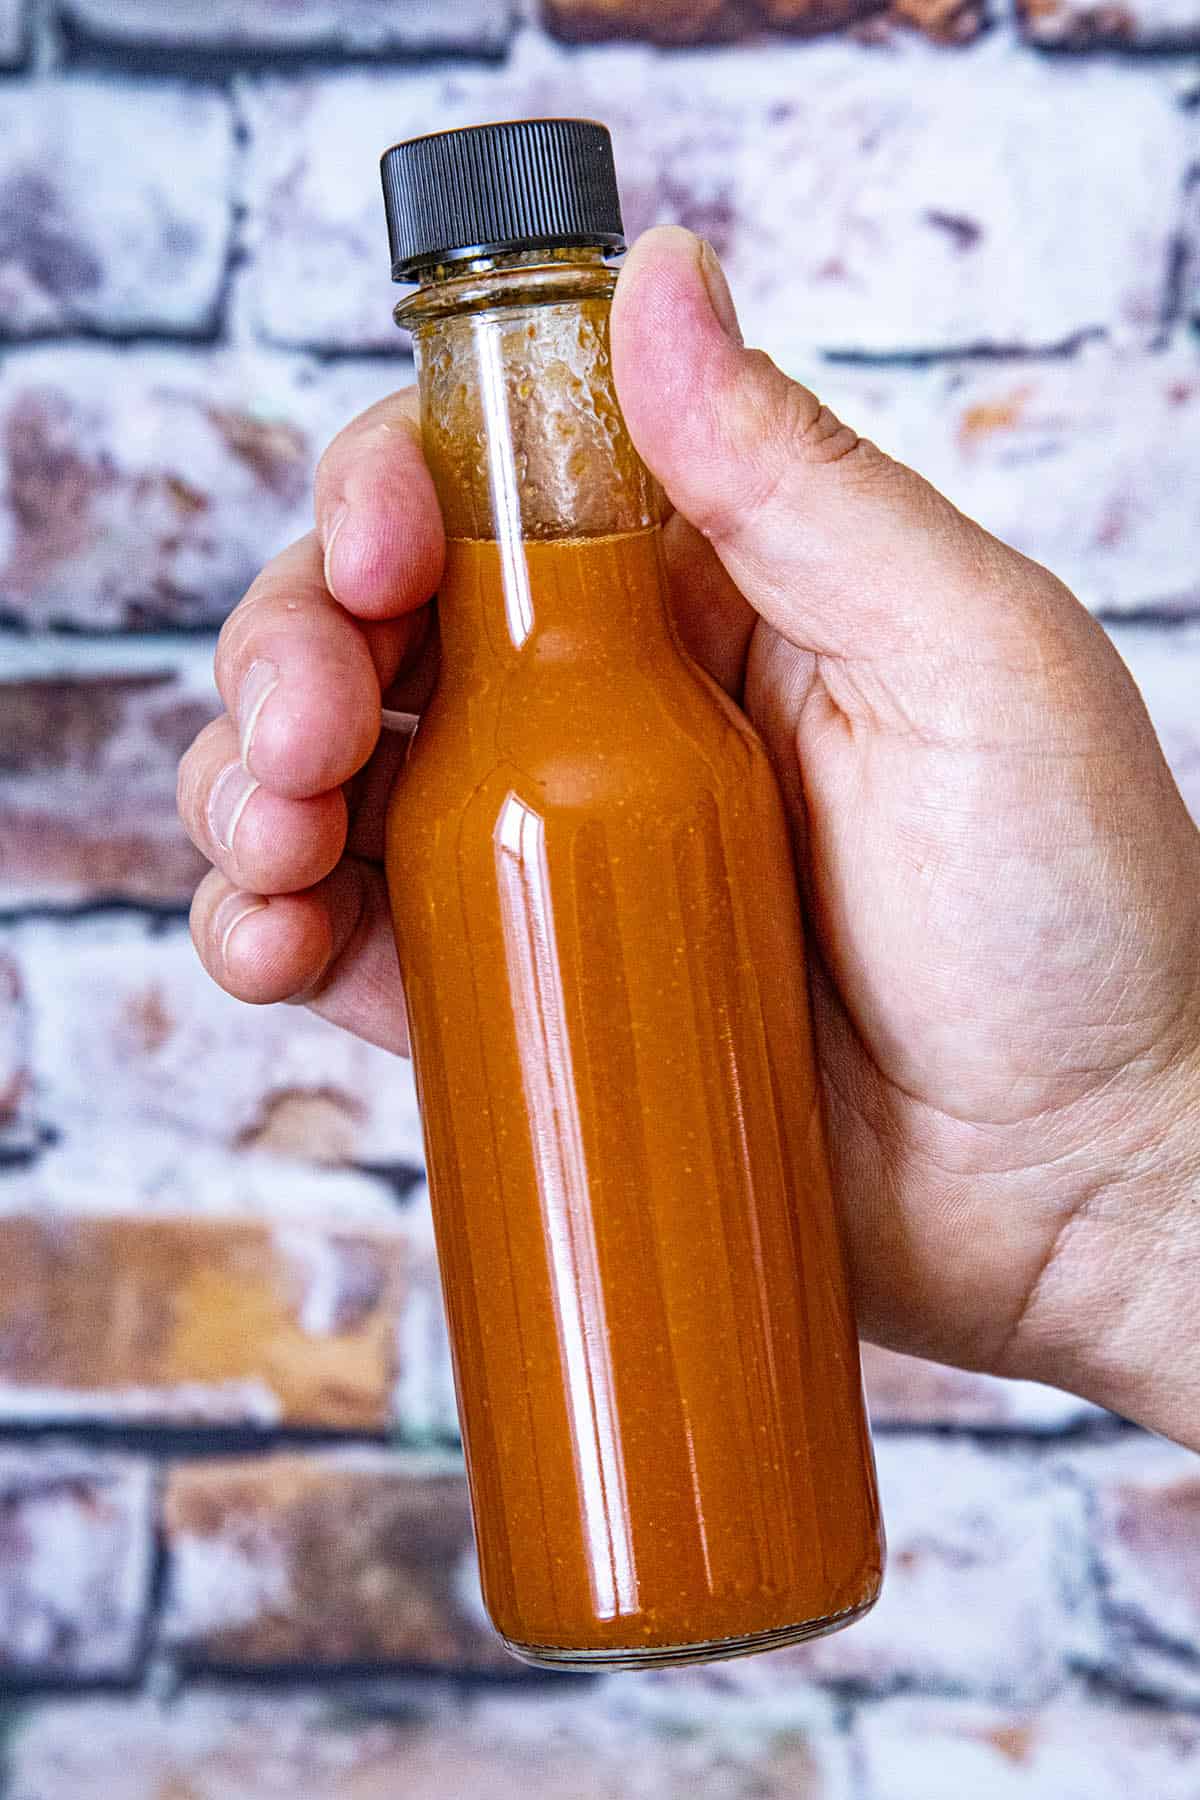 A bottle of spicy red hot sauce